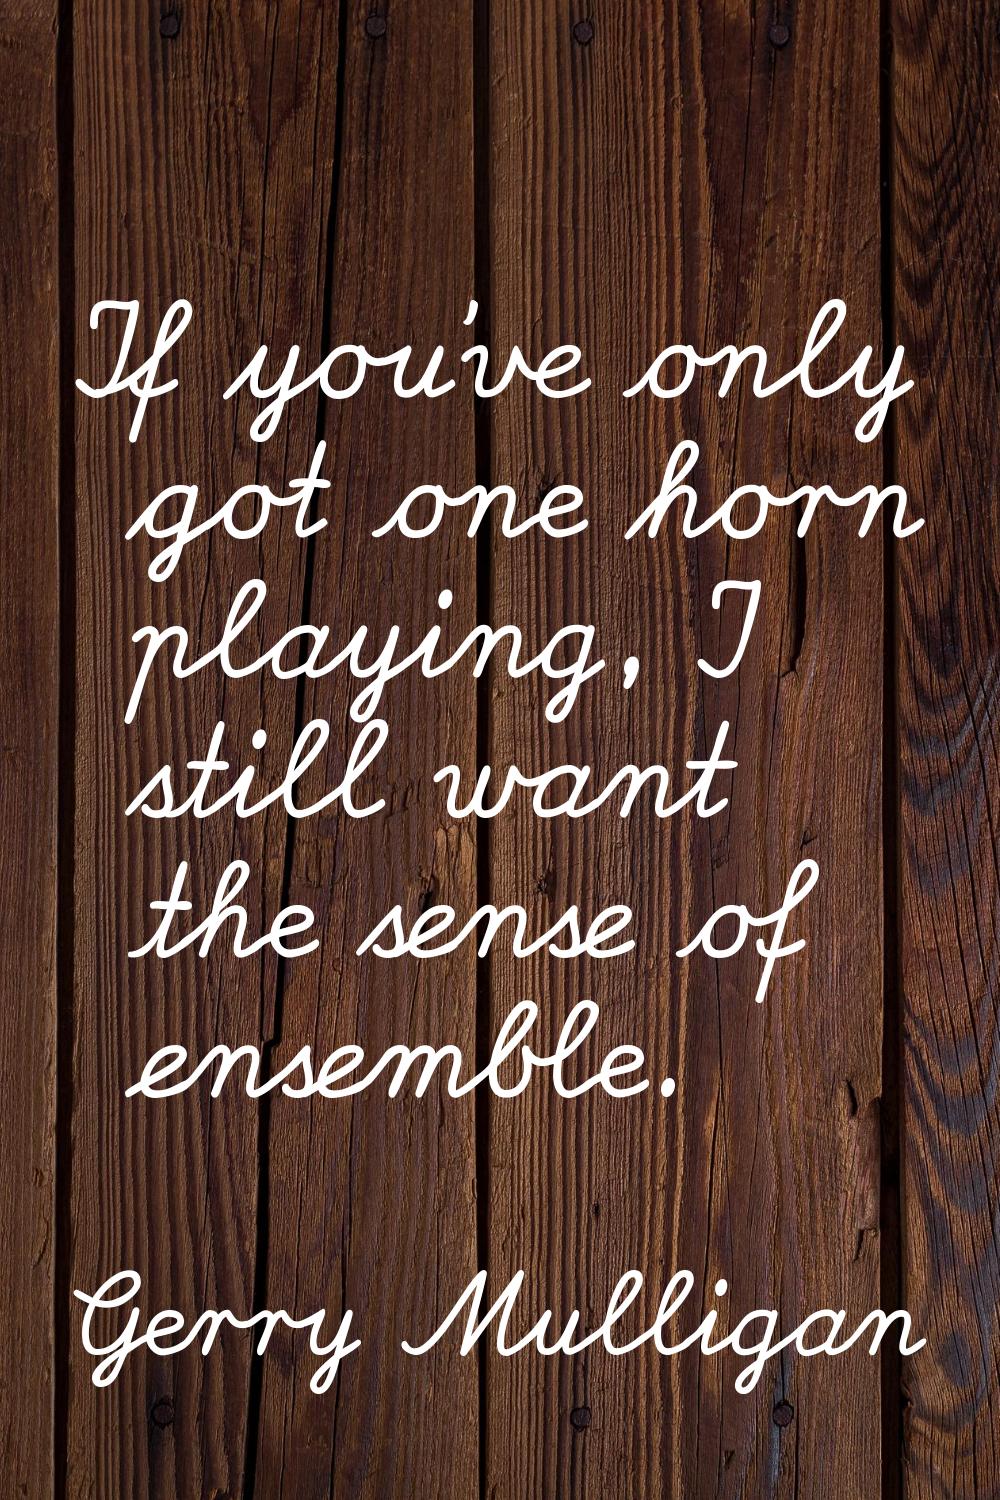 If you've only got one horn playing, I still want the sense of ensemble.